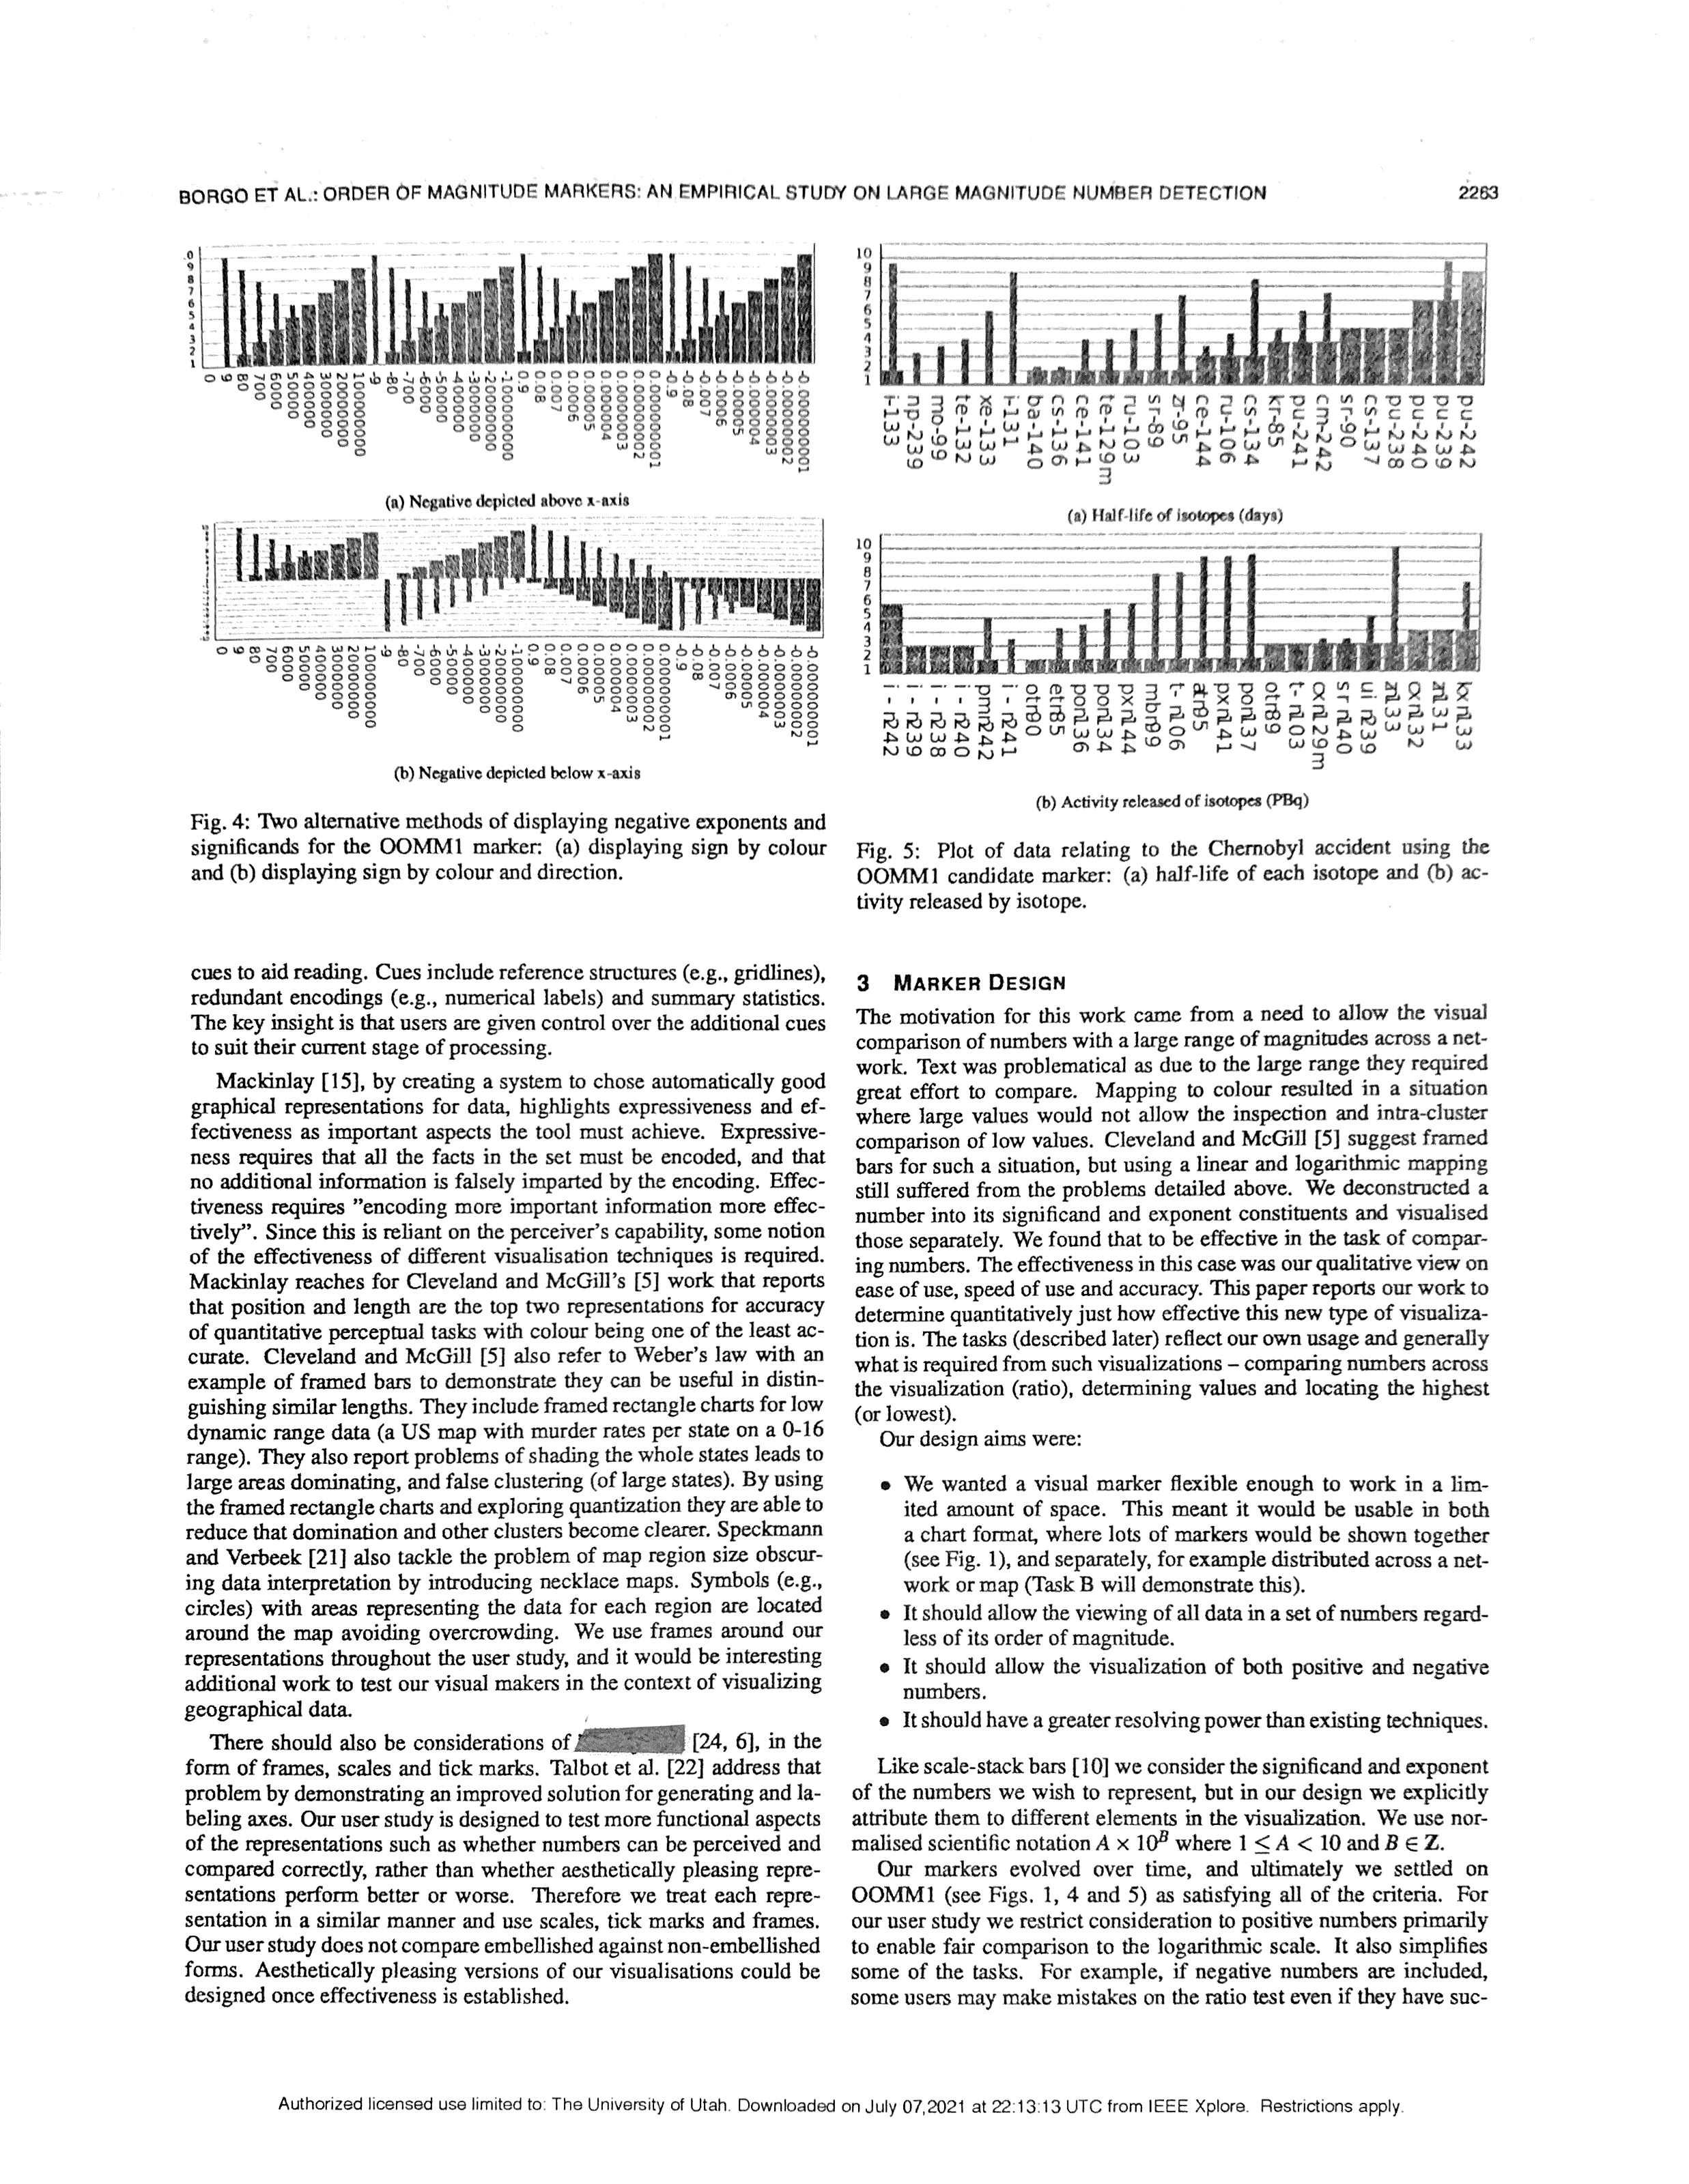 Page with chartjunk removed